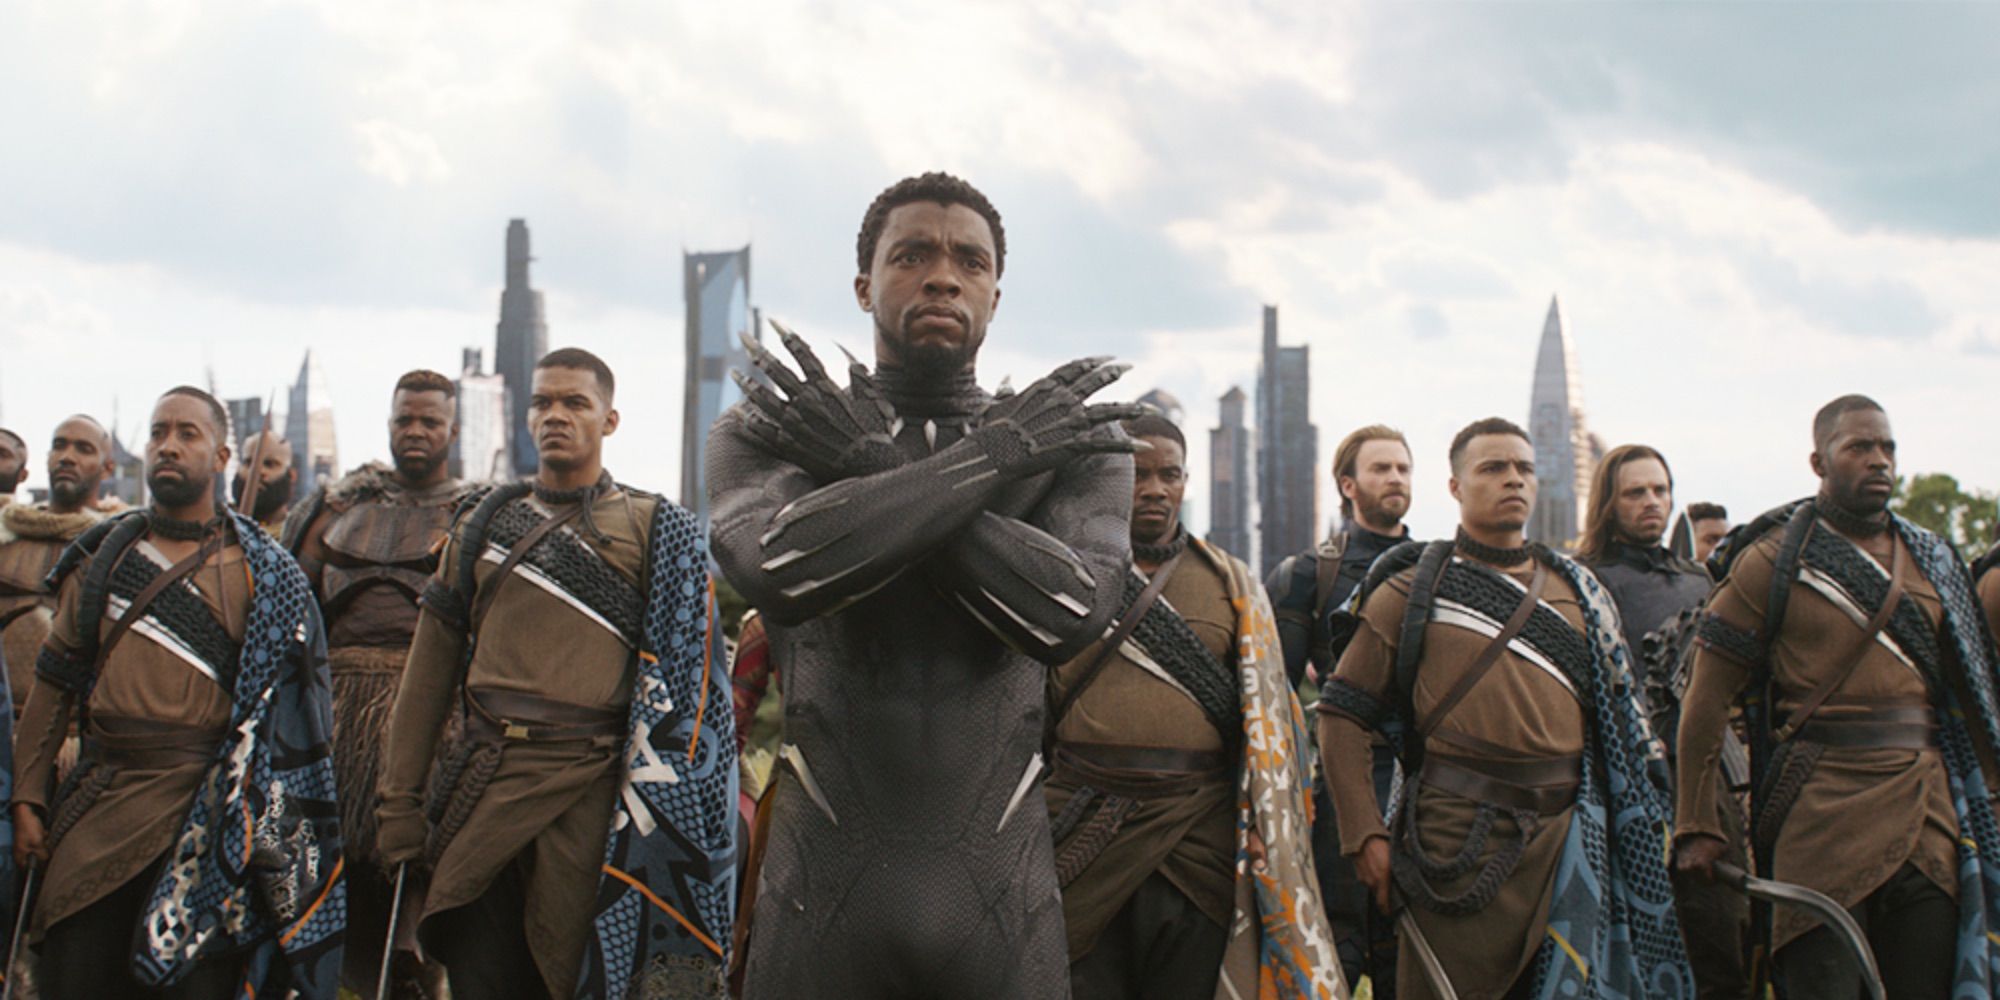 Chadwick Boseman as Black Panther doing the Wakanda Forever salute in Black Panther (2018)